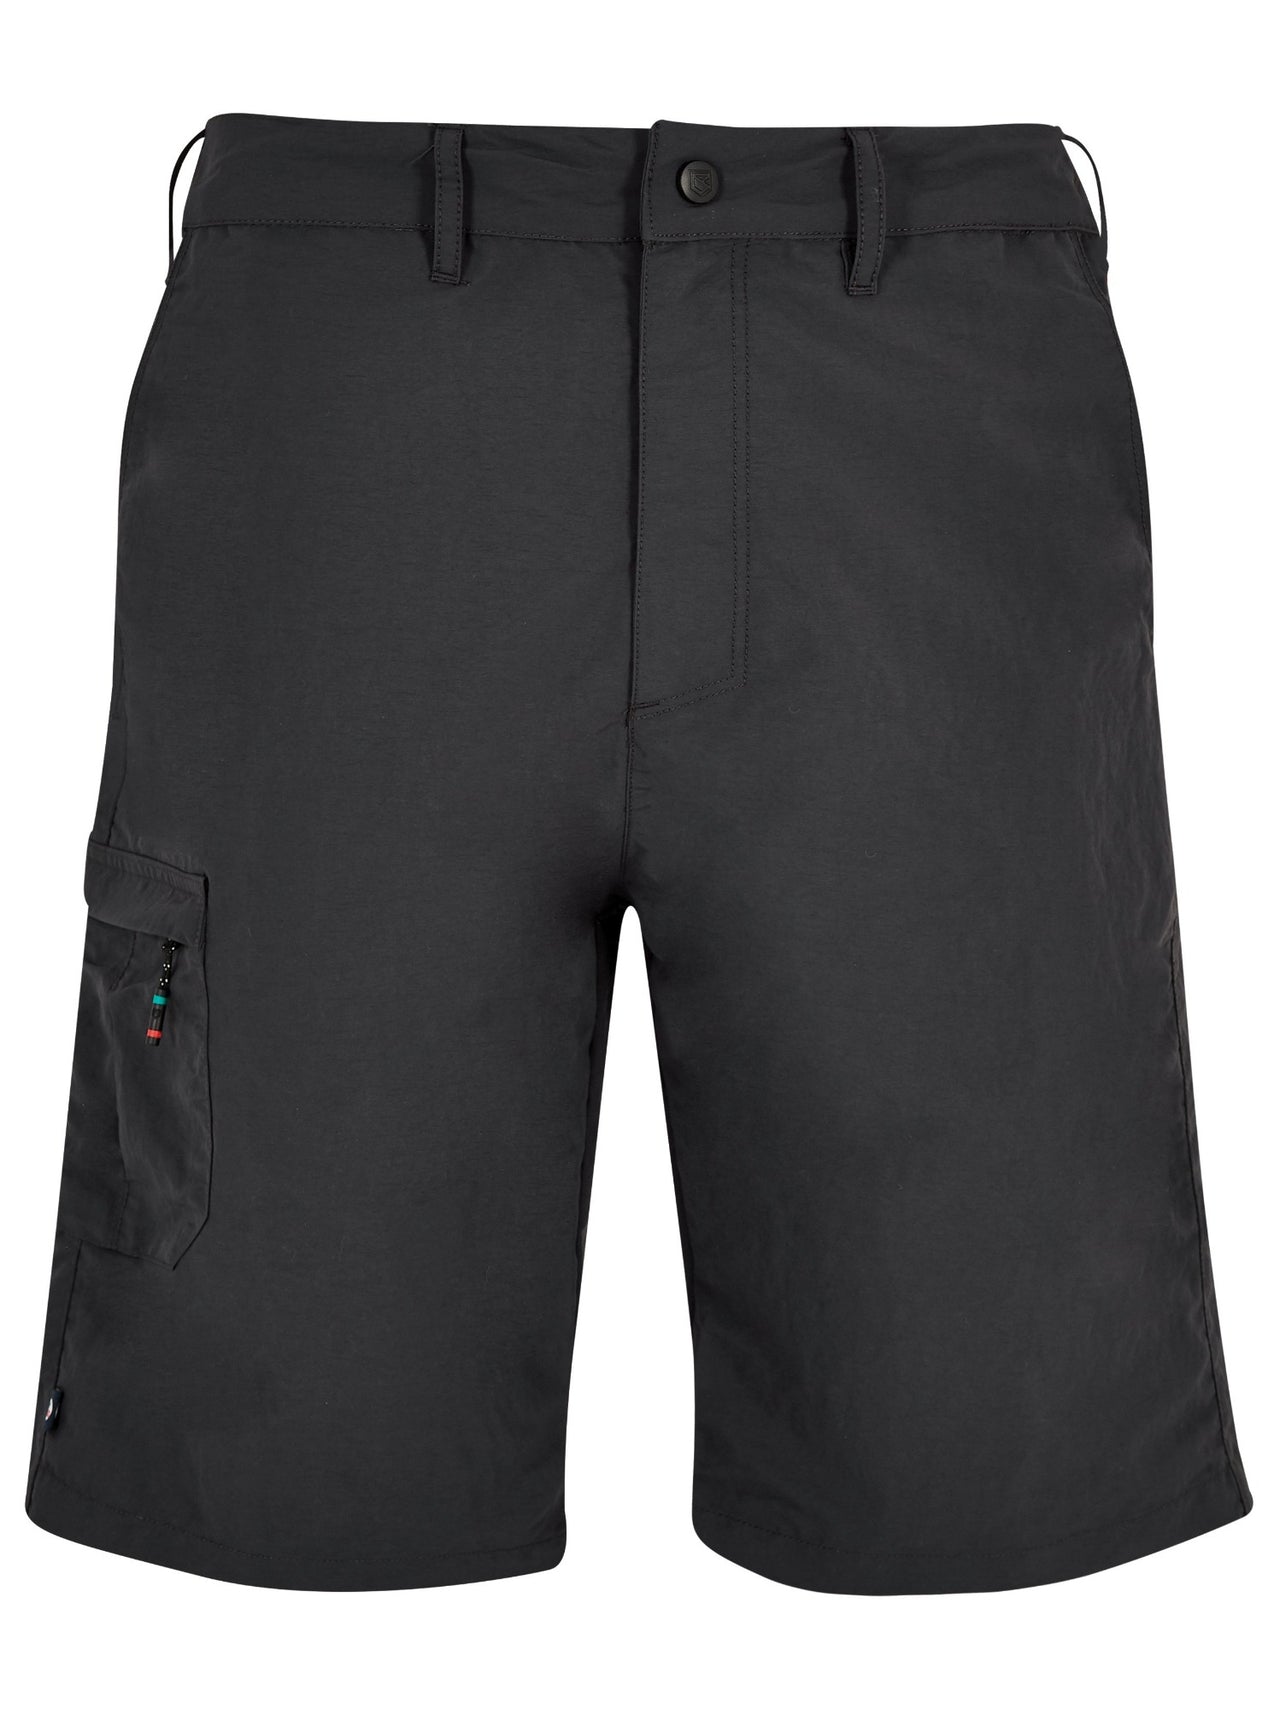 DUBARRY Mens Cyprus Fast Dry Crew Shorts GRAPHITE (Online only*)